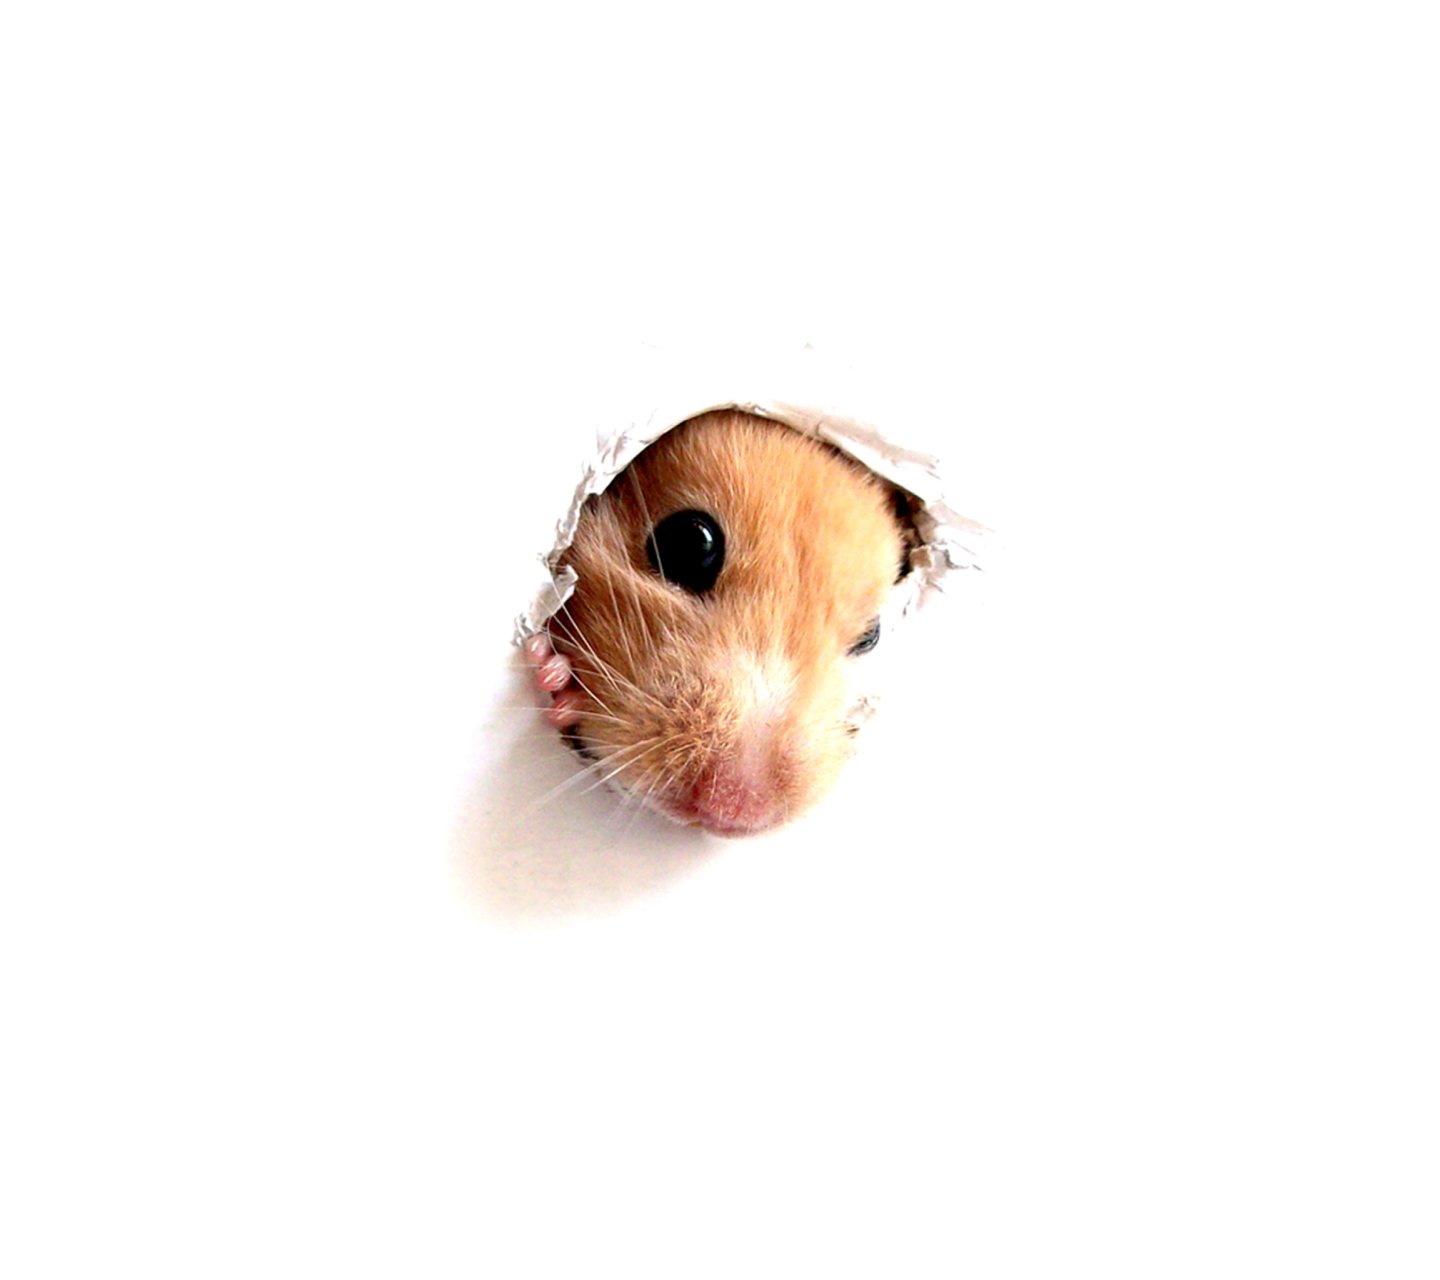 Hamster In Hole On Your Screen wallpaper 1440x1280